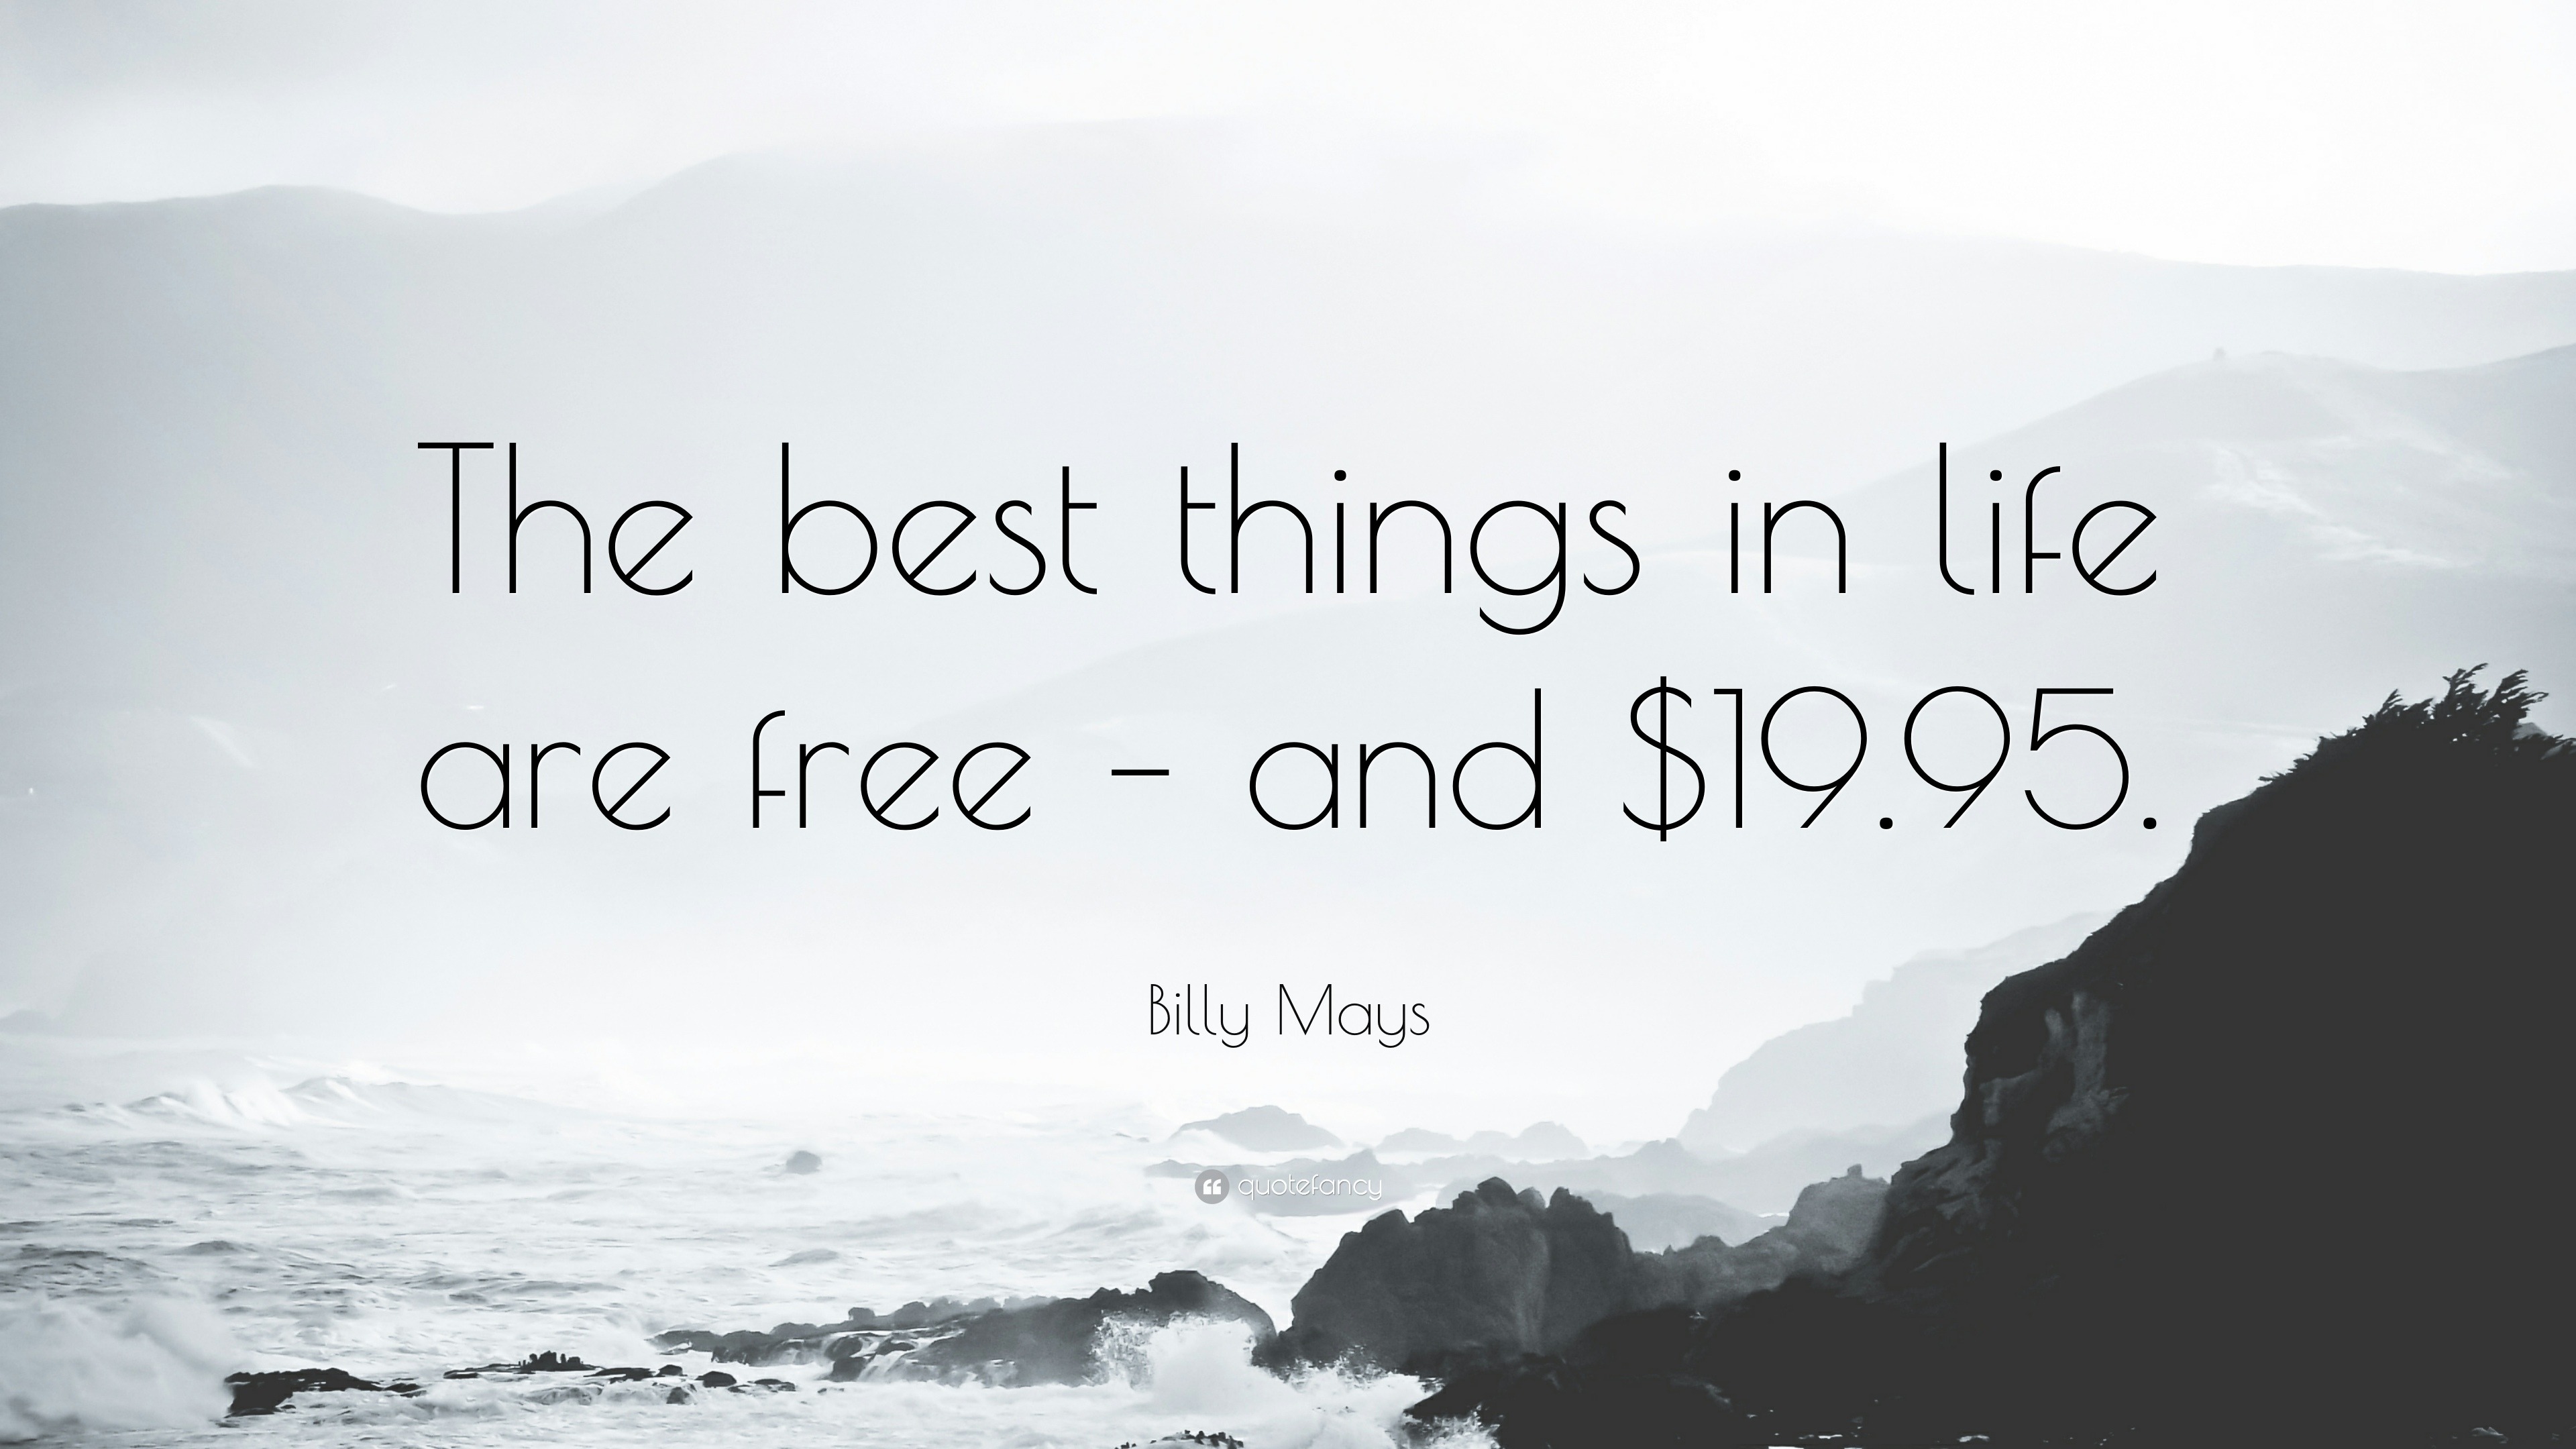 Billy Mays Quote “The best things in life are free – and $19 95